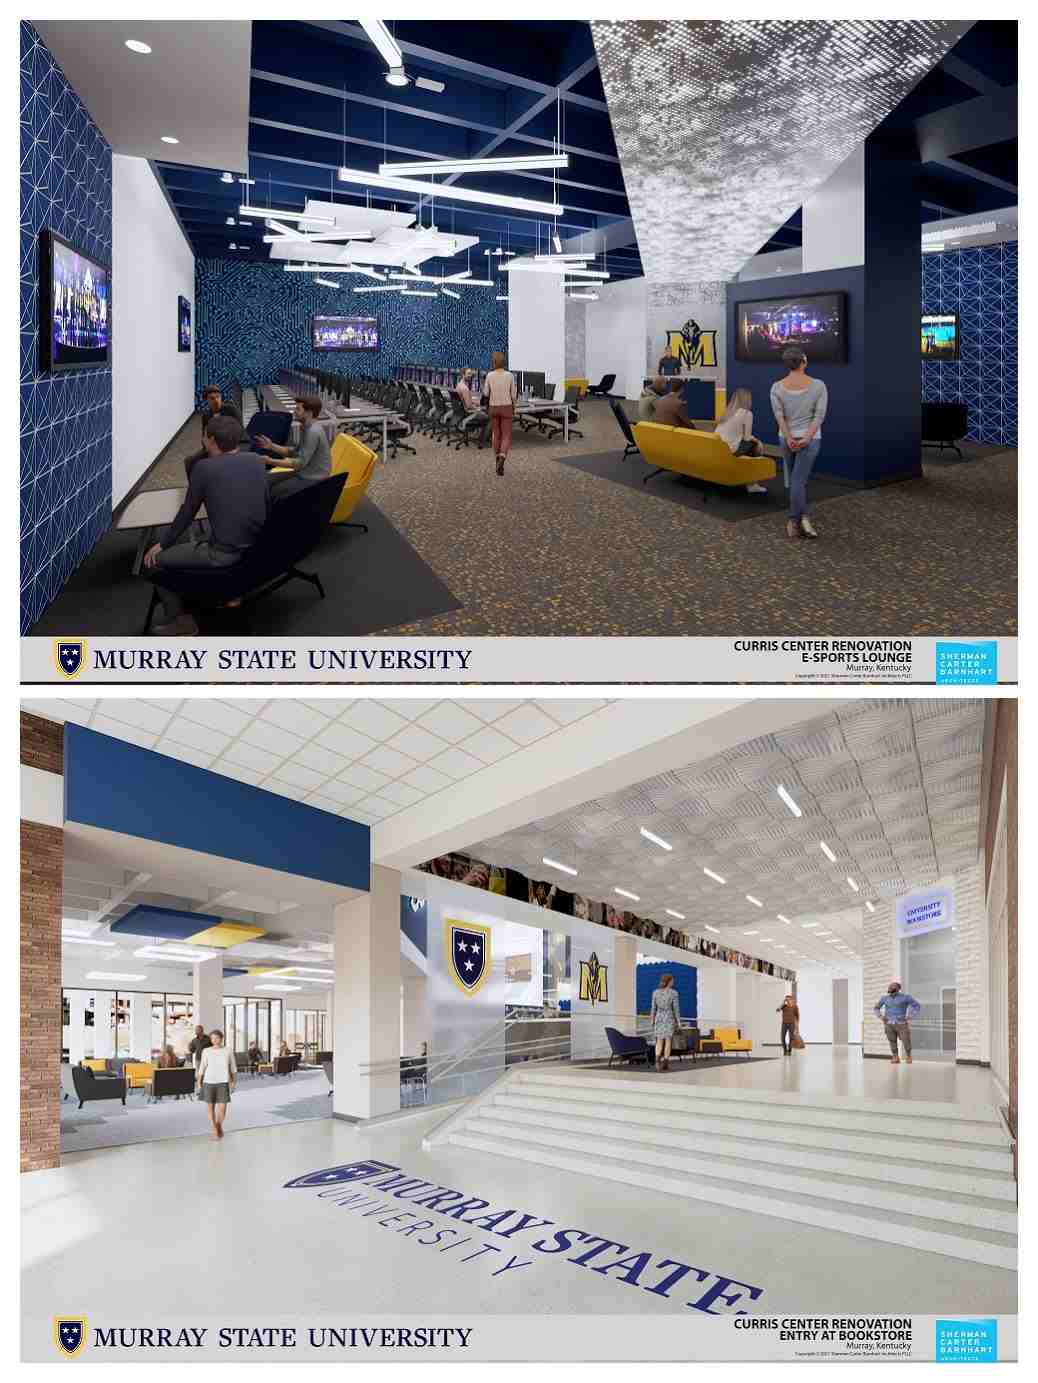 renderings of the Curris Center located on Murray State University’s campus